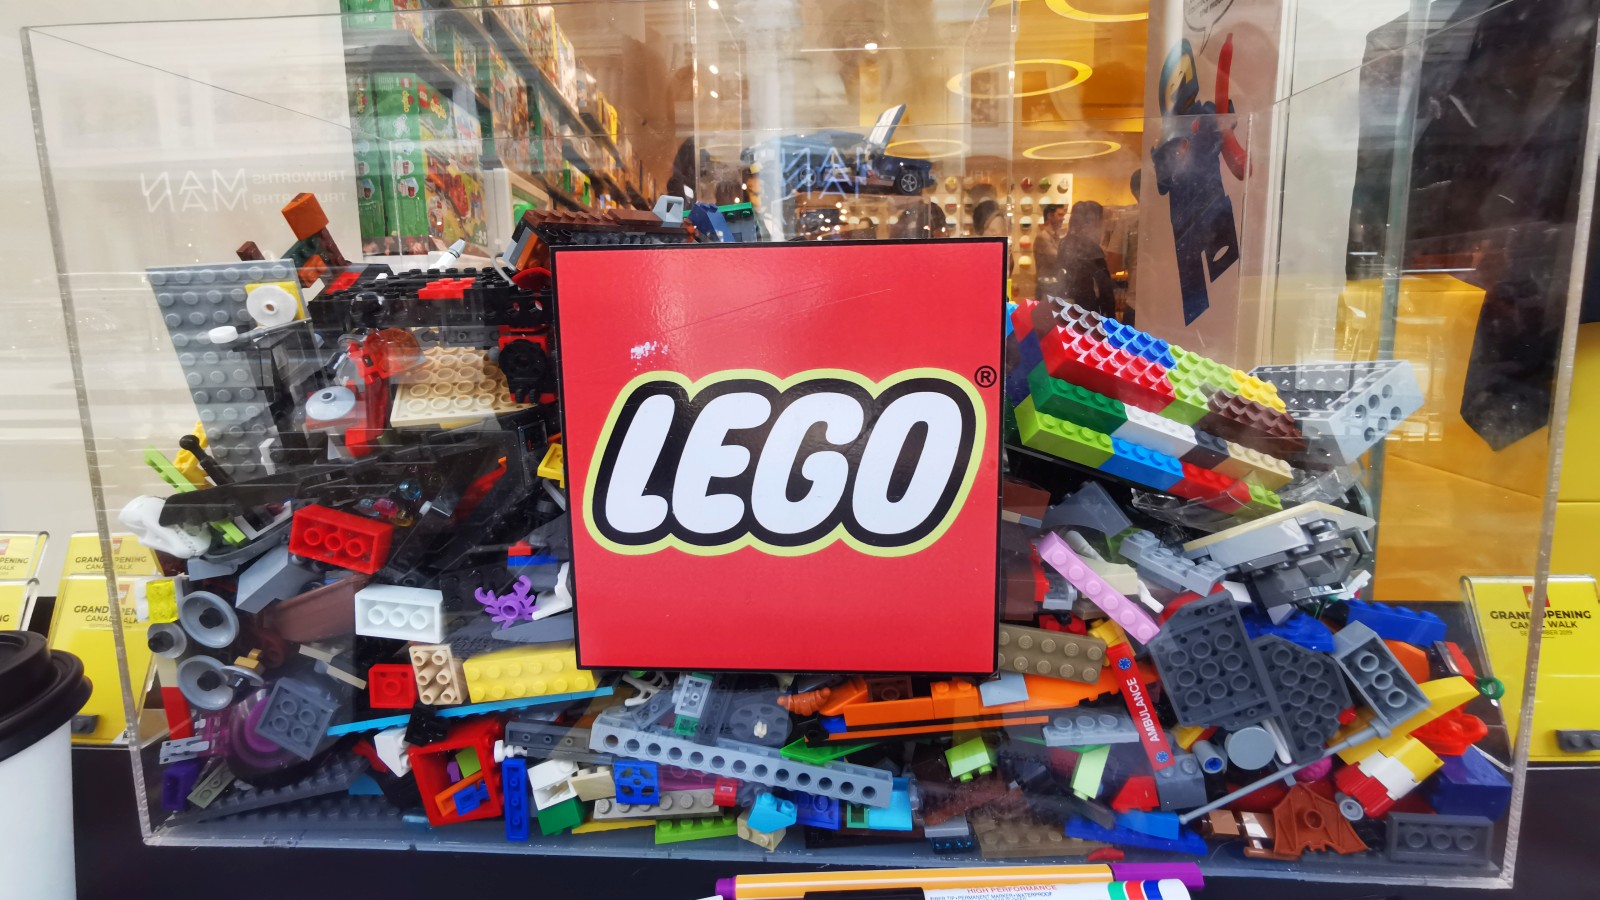 In pictures: this is Cape Town's first certified Lego ...